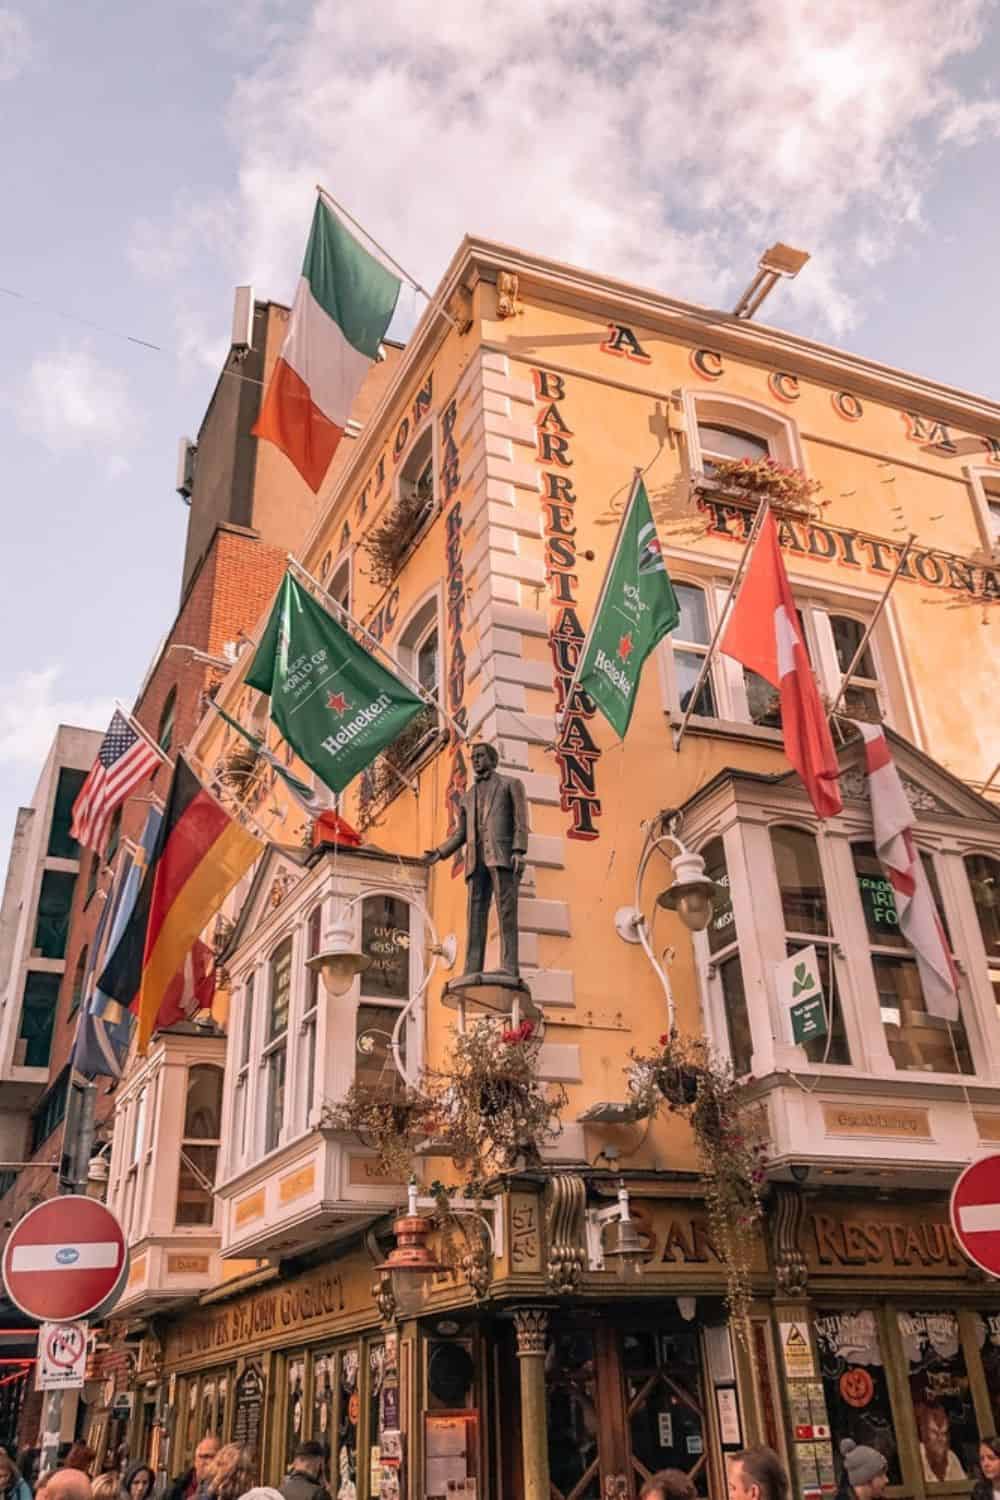 A colorful corner building in Dublin adorned with various international flags, including the Irish flag, capturing the city's welcoming spirit